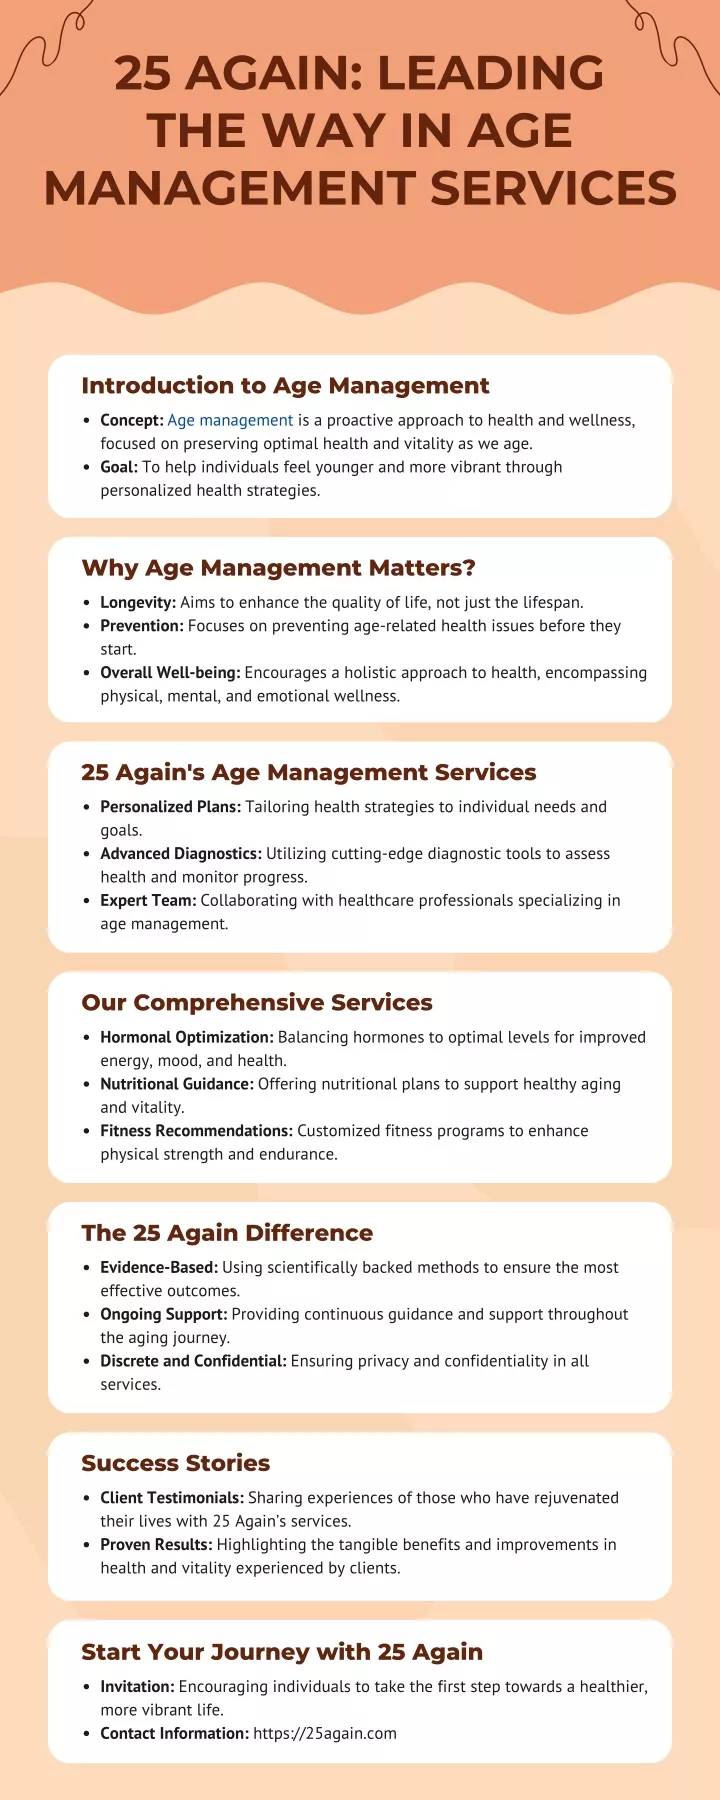 25 again leading the way in age management